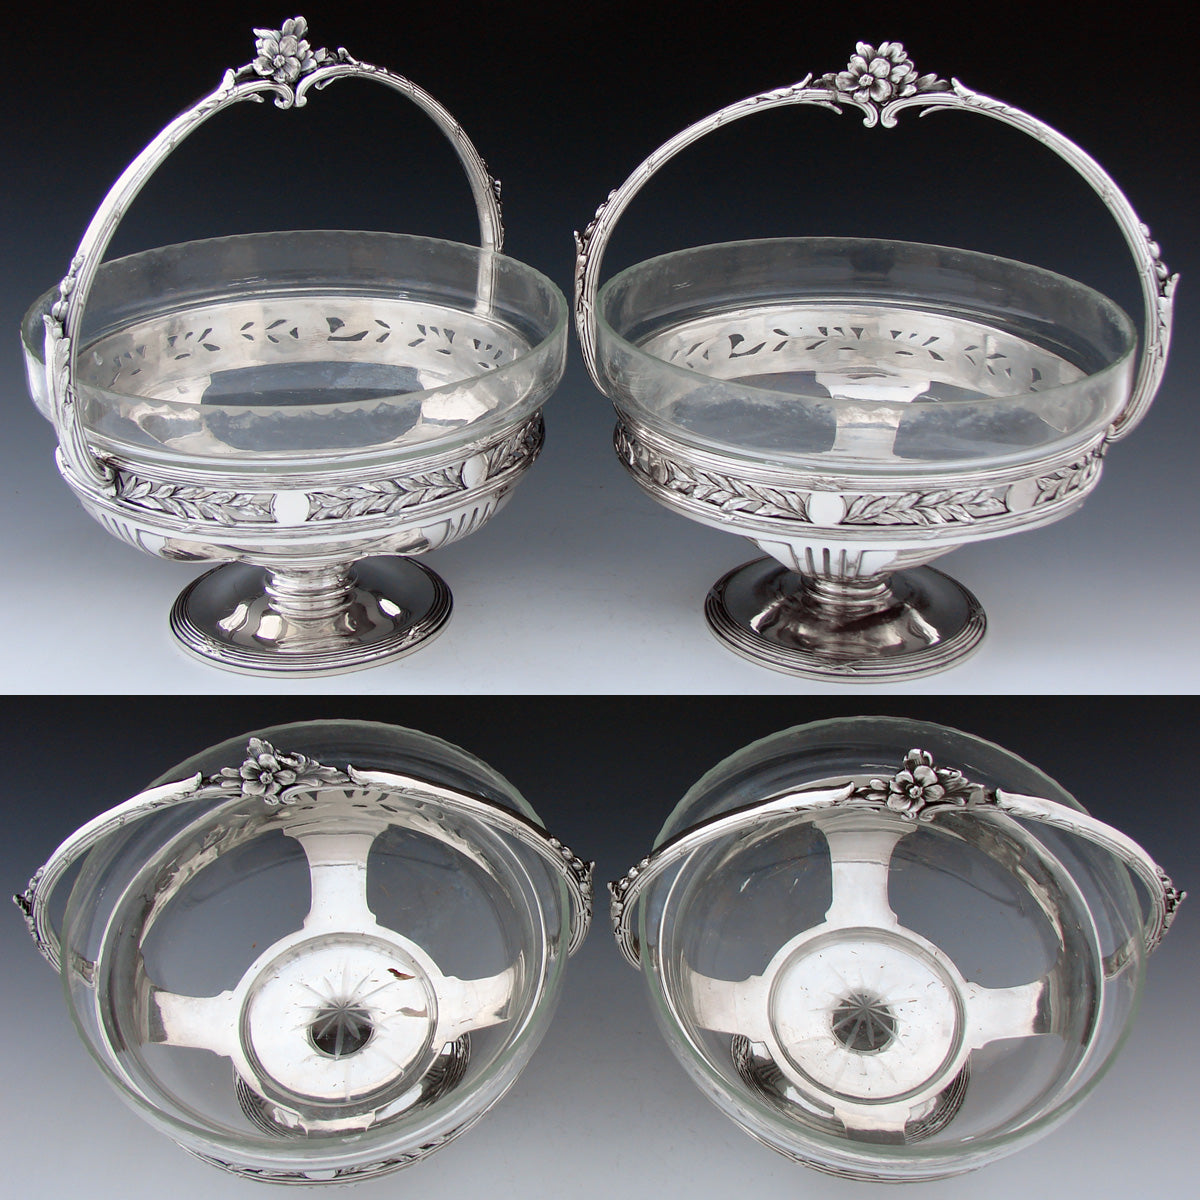 Antique to Vintage Silver Plate 10" Tall Basket Style Centerpiece PAIR with Original Glass Inserts, Laurel & Floral Handles